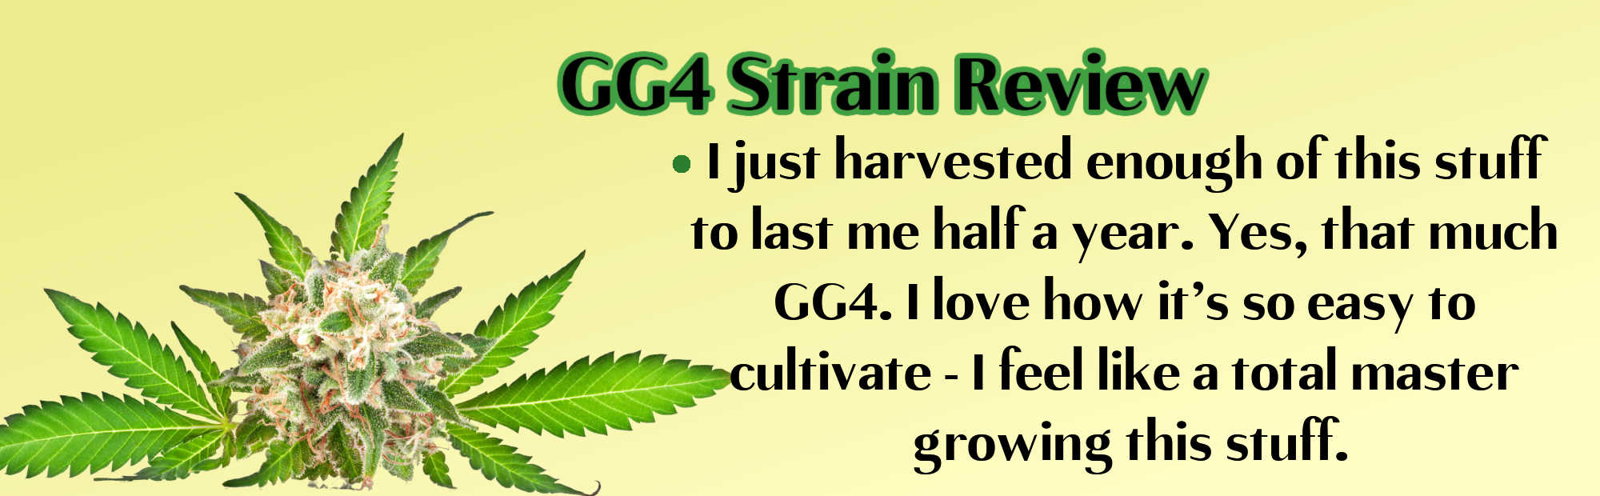 image of gg4 strain review